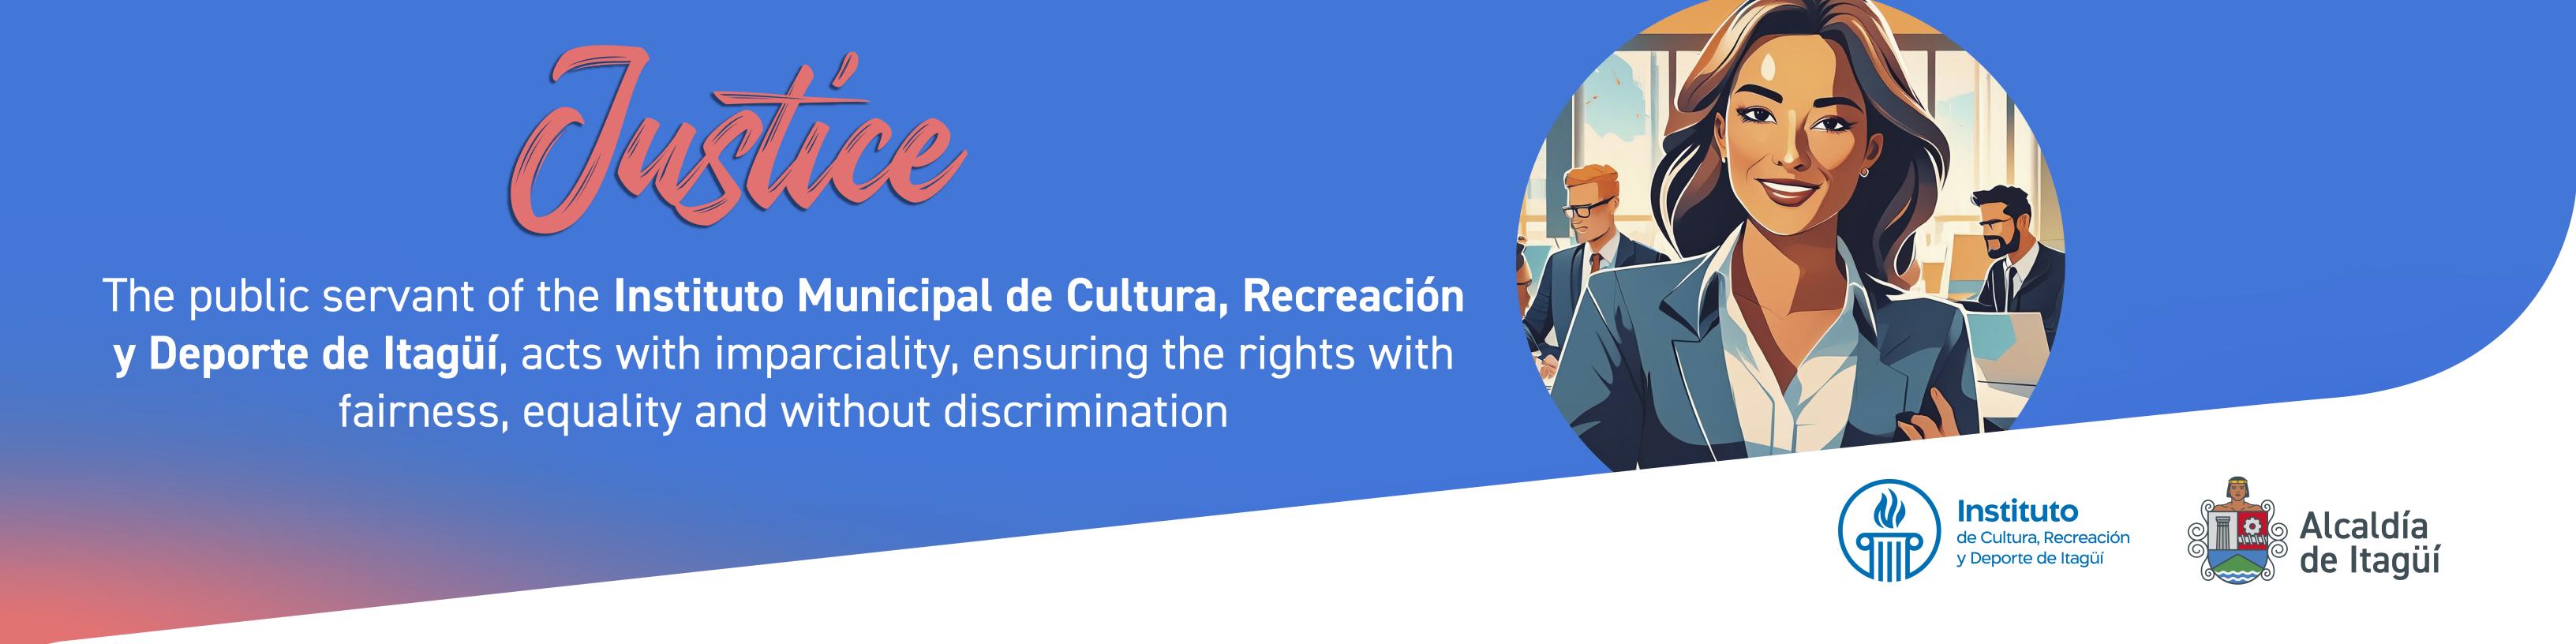 The public servant of the Municipal Institute of Culture, Recreation, and Sports of Itagüí recognizes, values, and treats all individuals with dignity, regardless of their virtues or flaws, regardless of their profession, origin, titles, or any other condition.